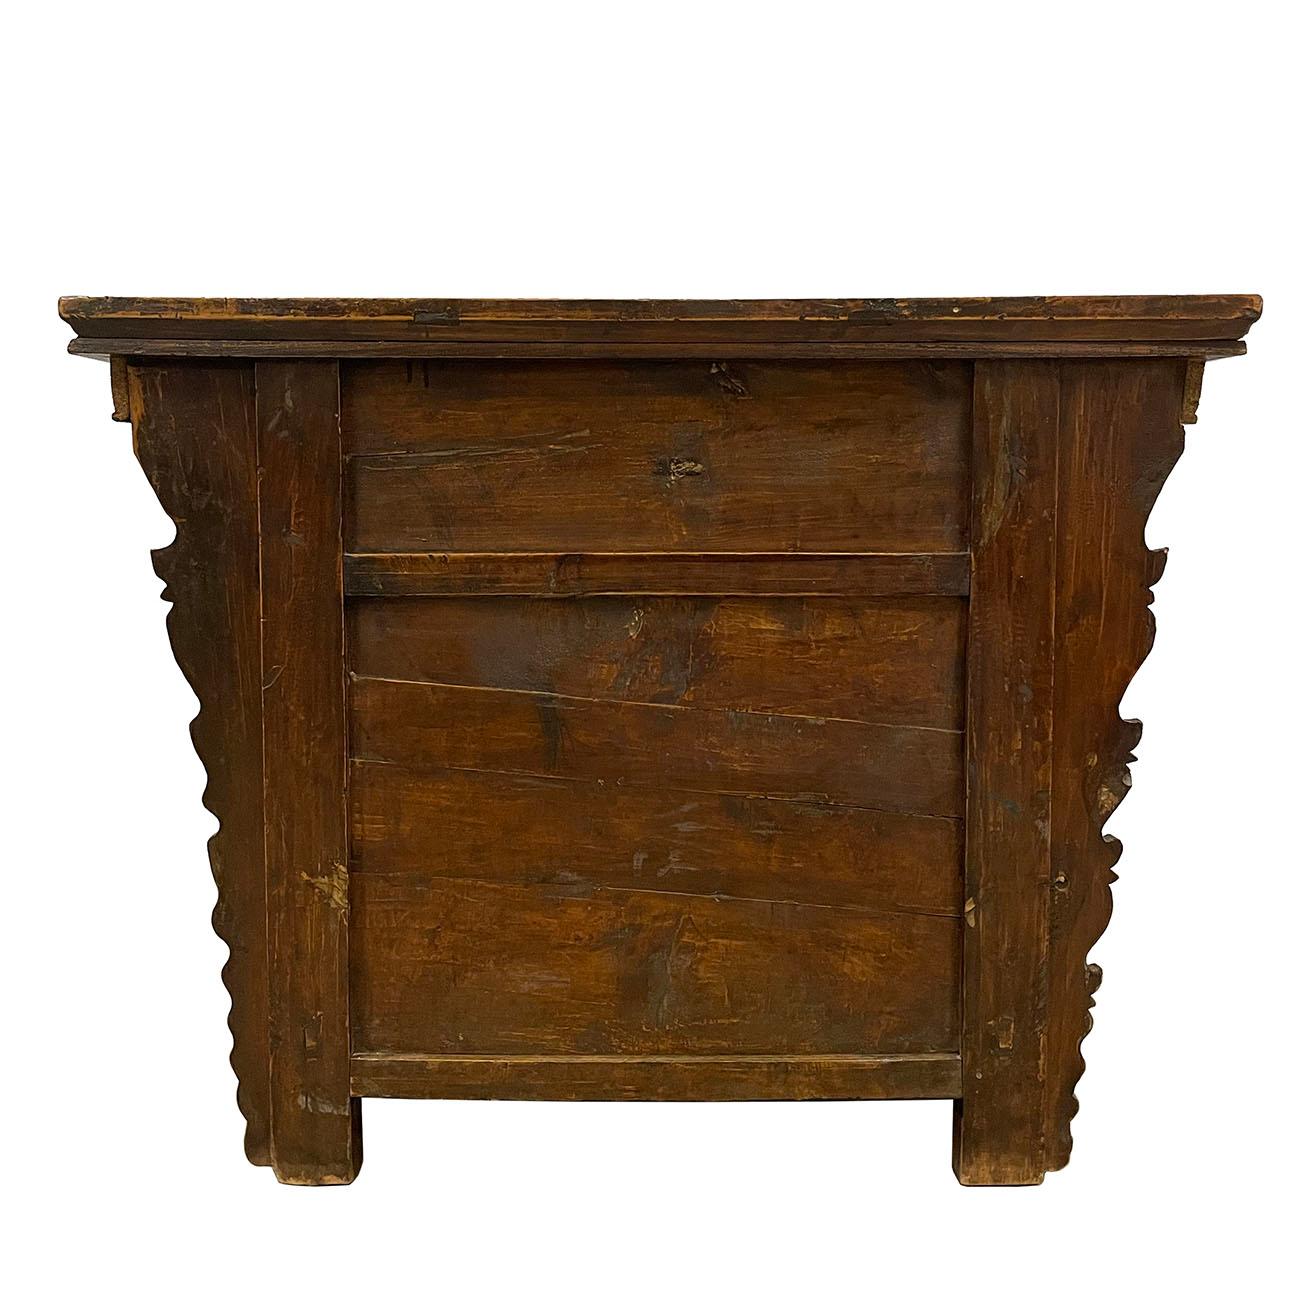 19th Century Antique Chinese Qing Dynasty Carved Coffer Table/Sideboard For Sale 6